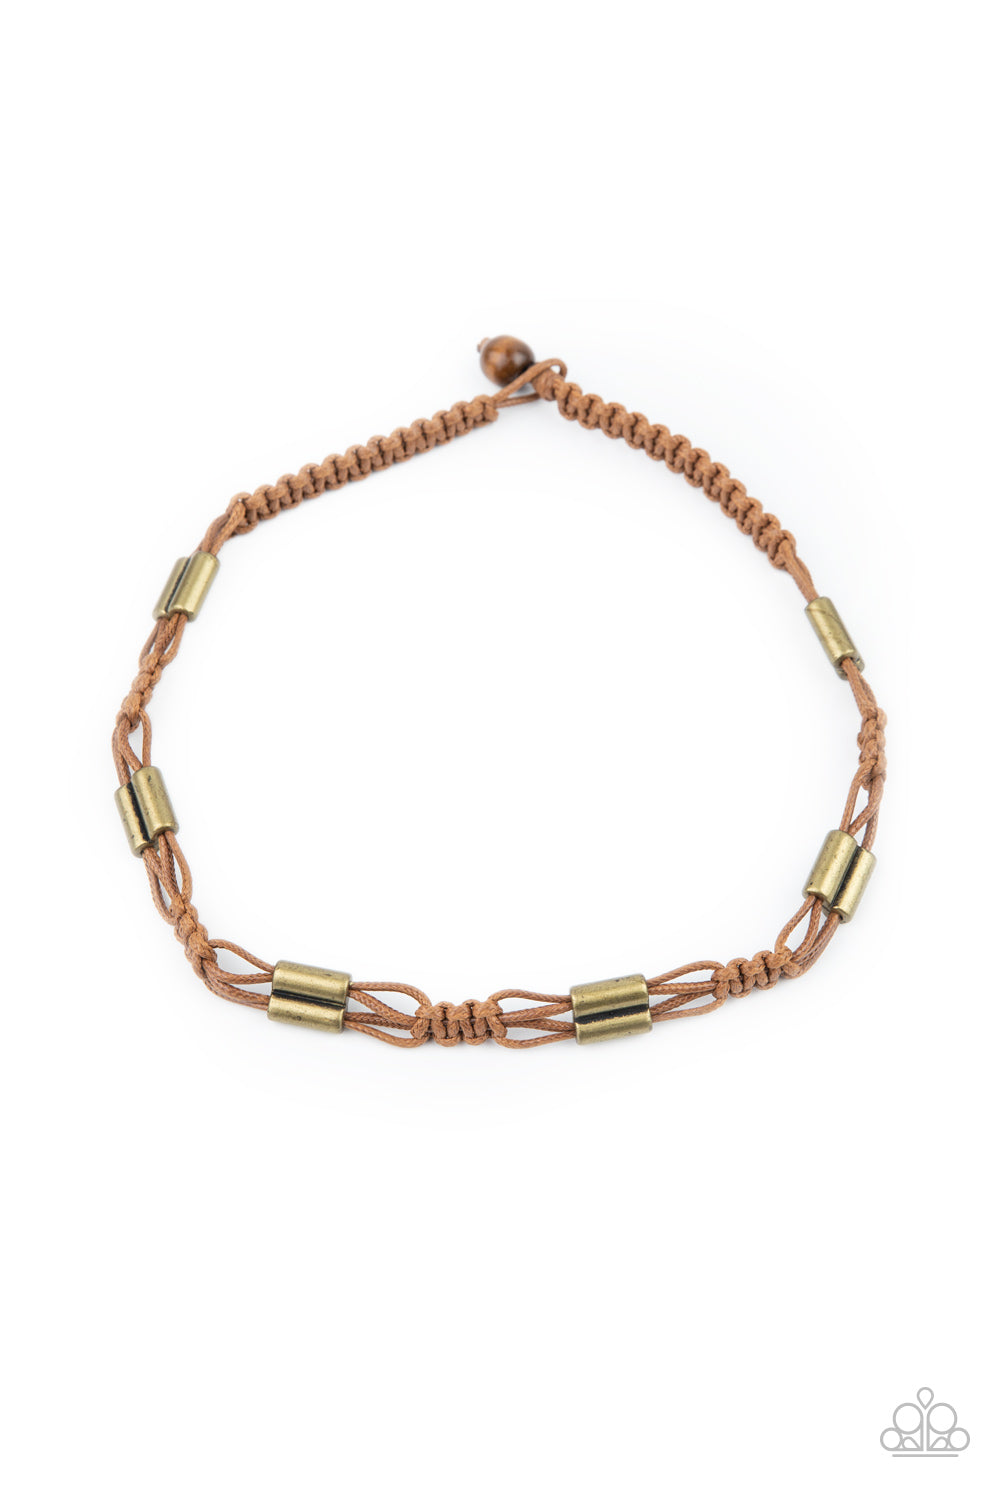 Paparazzi - Offshore Drifter - Brown Necklace